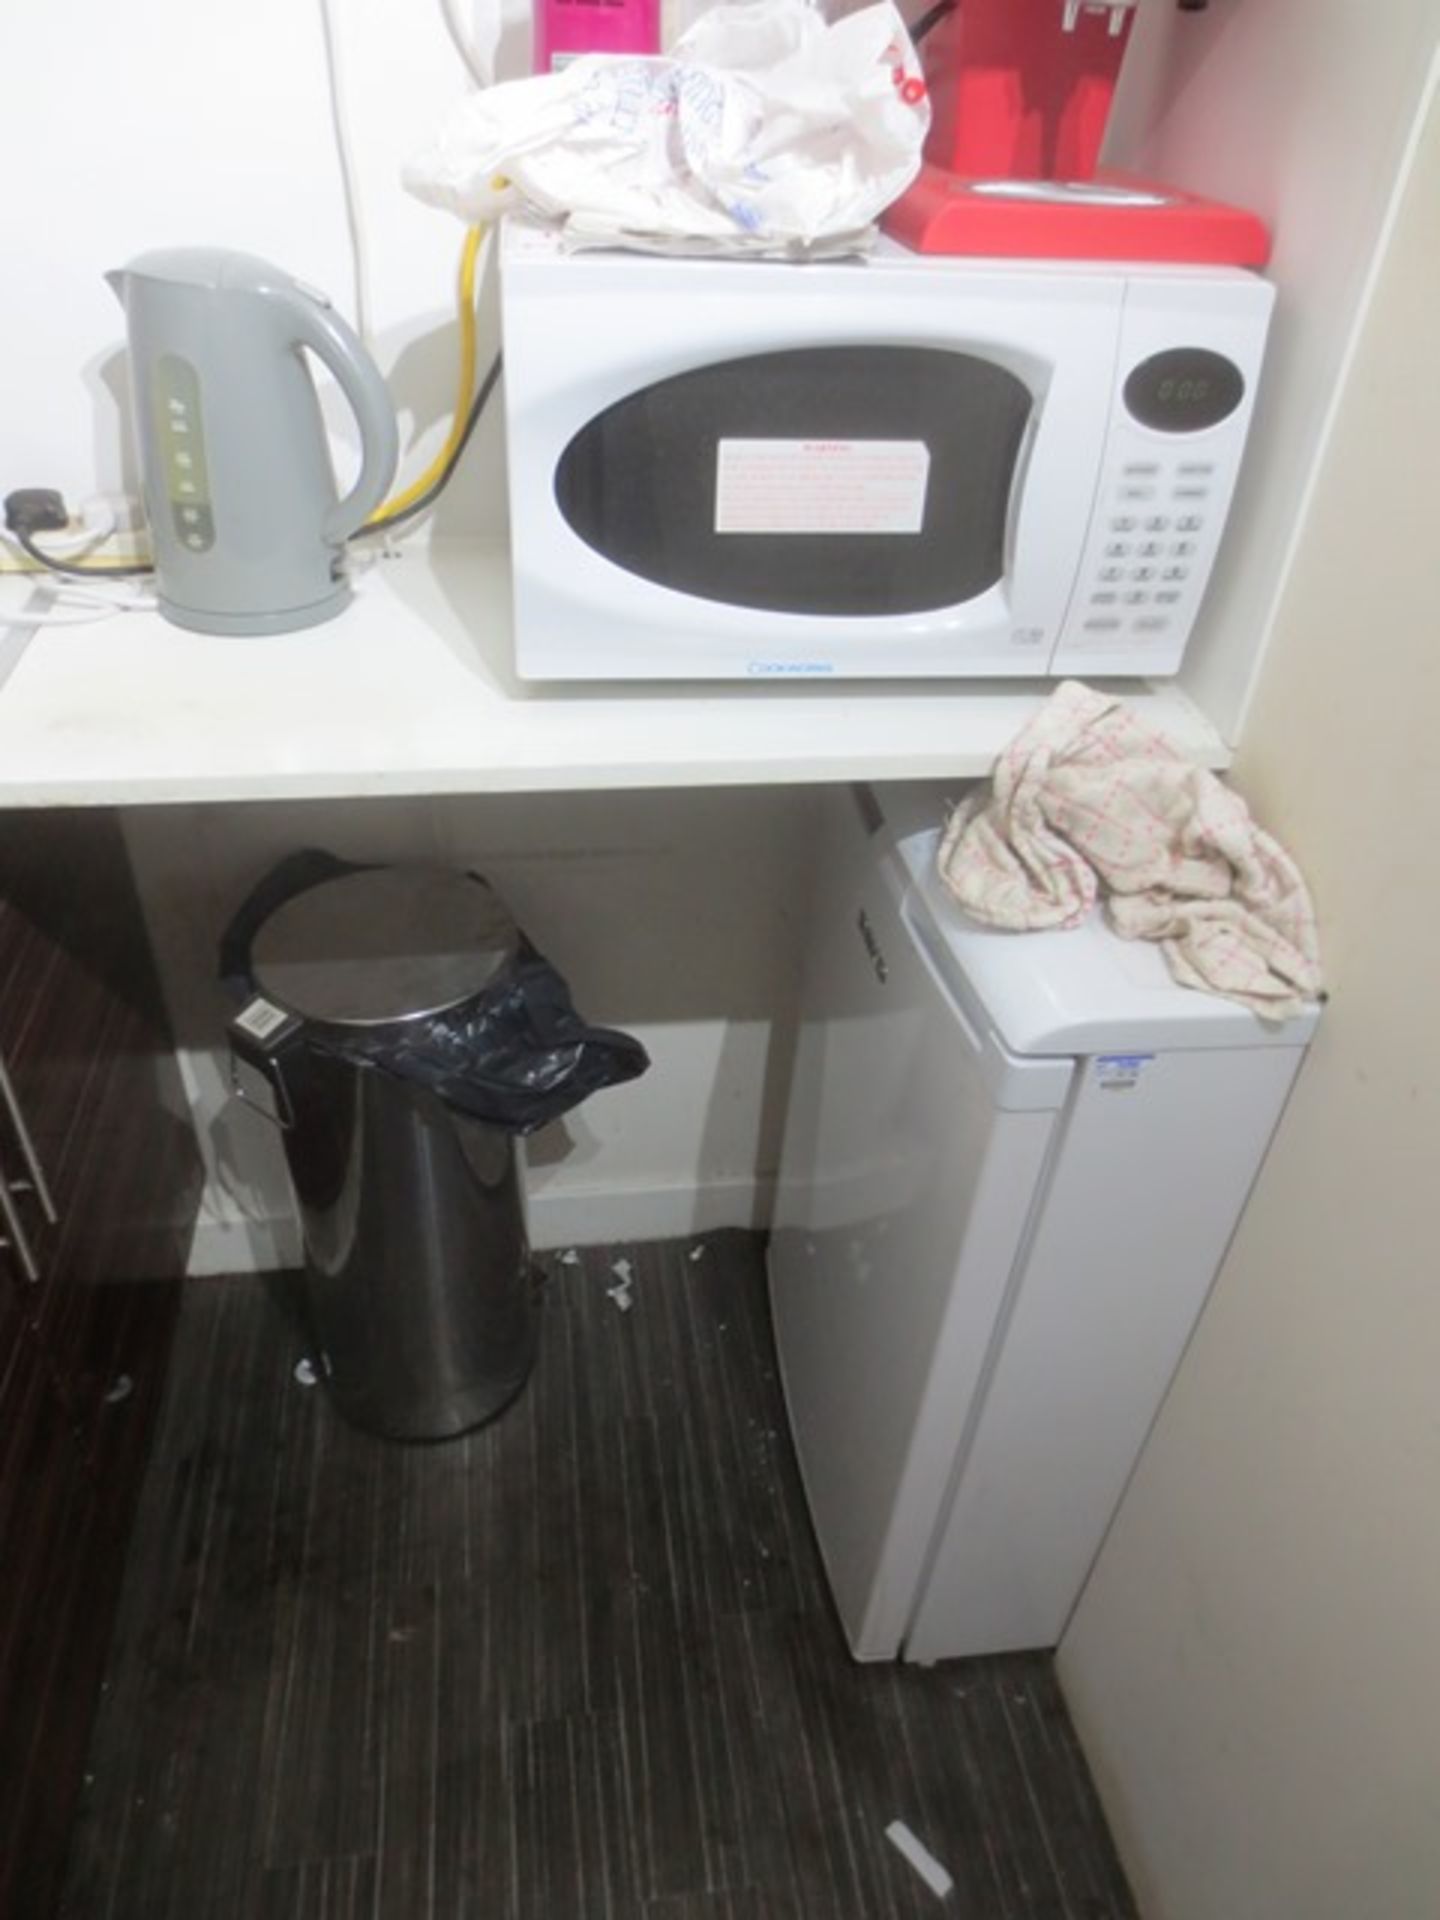 Contents of kitchen to include Cookworks 800W microwave, Beko refridgerator, kettle, Smarttronics